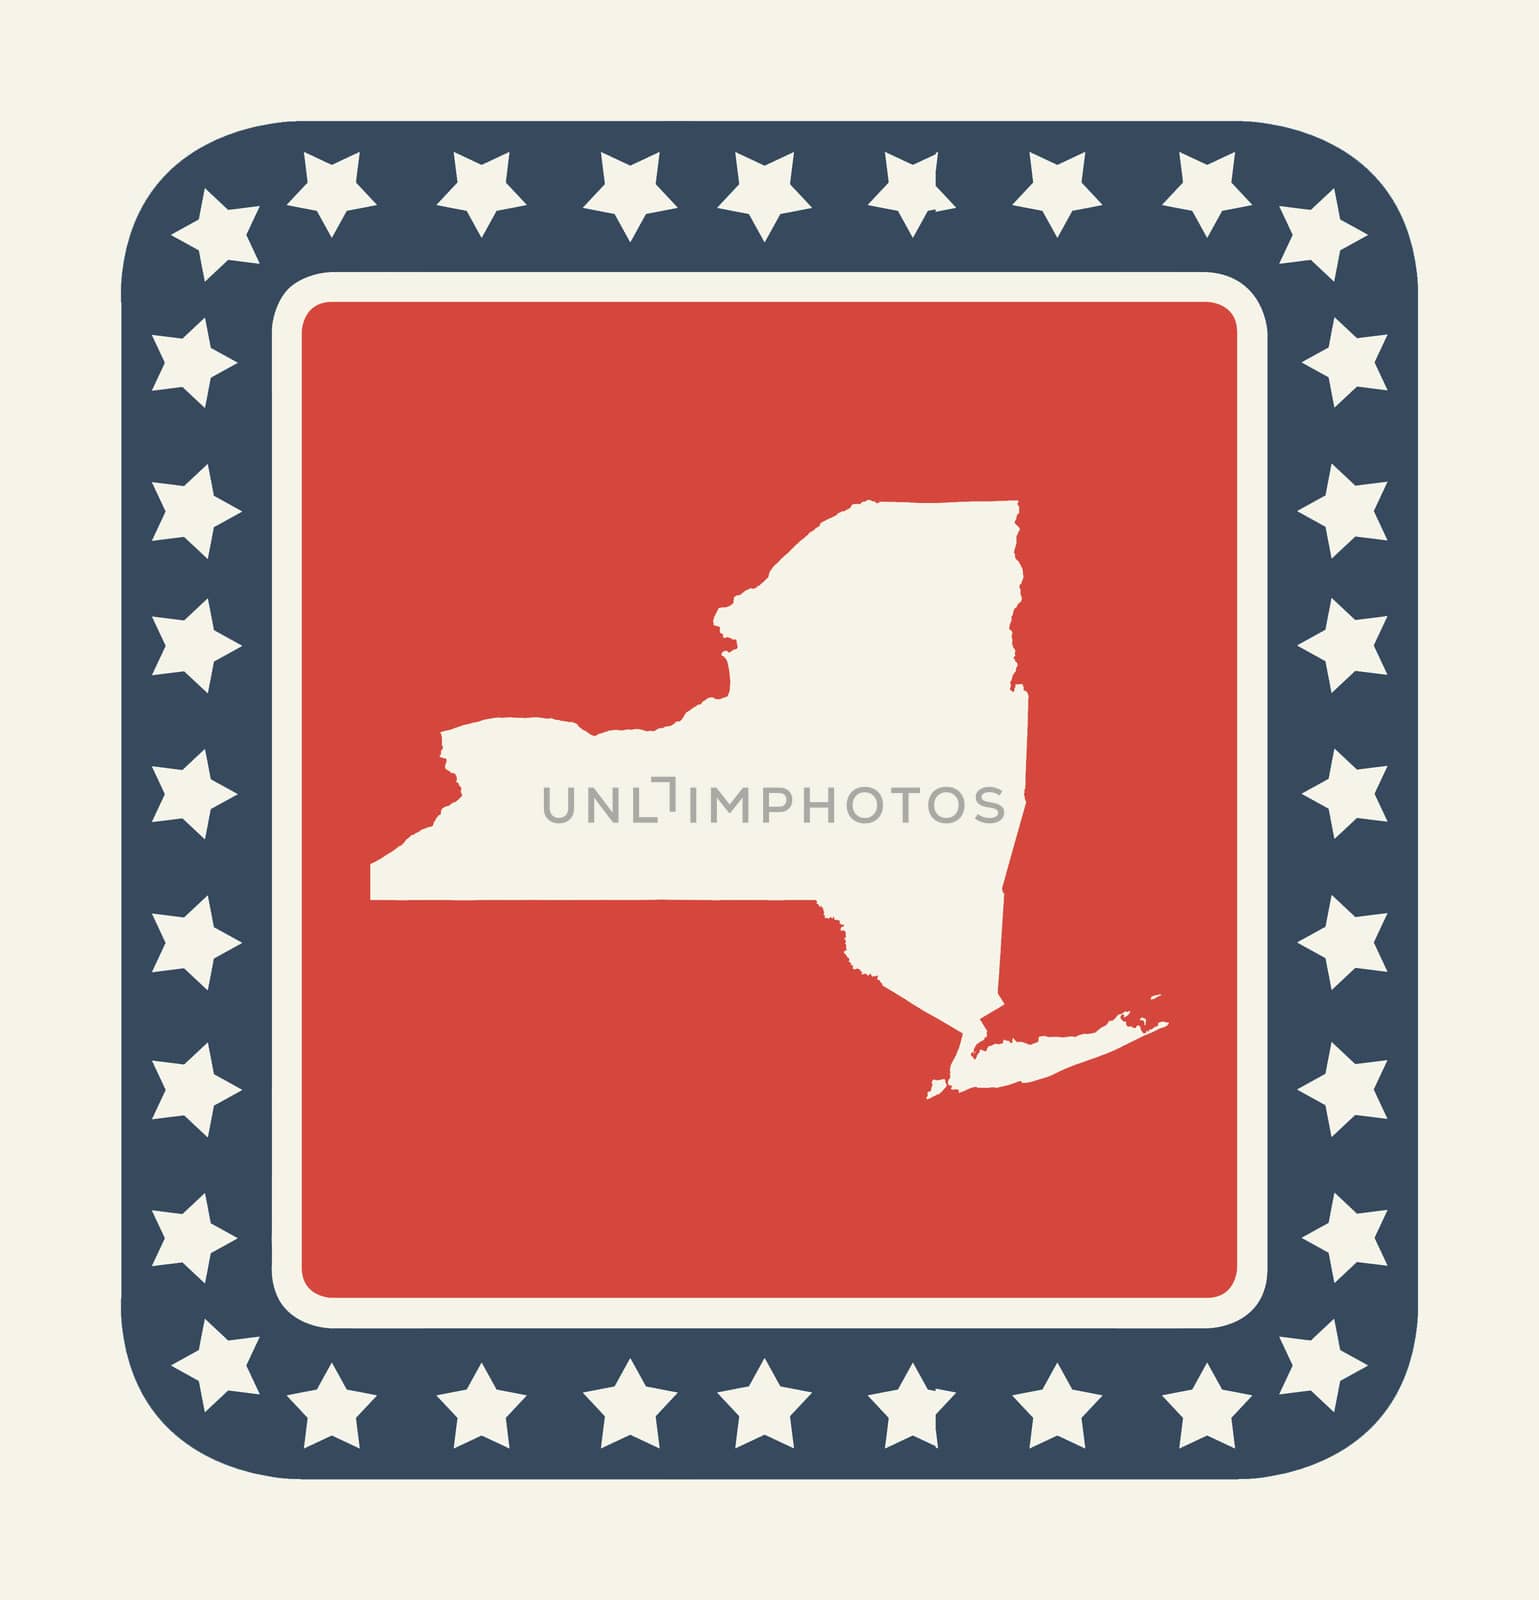 New York state button on American flag in flat web design style, isolated on white background.